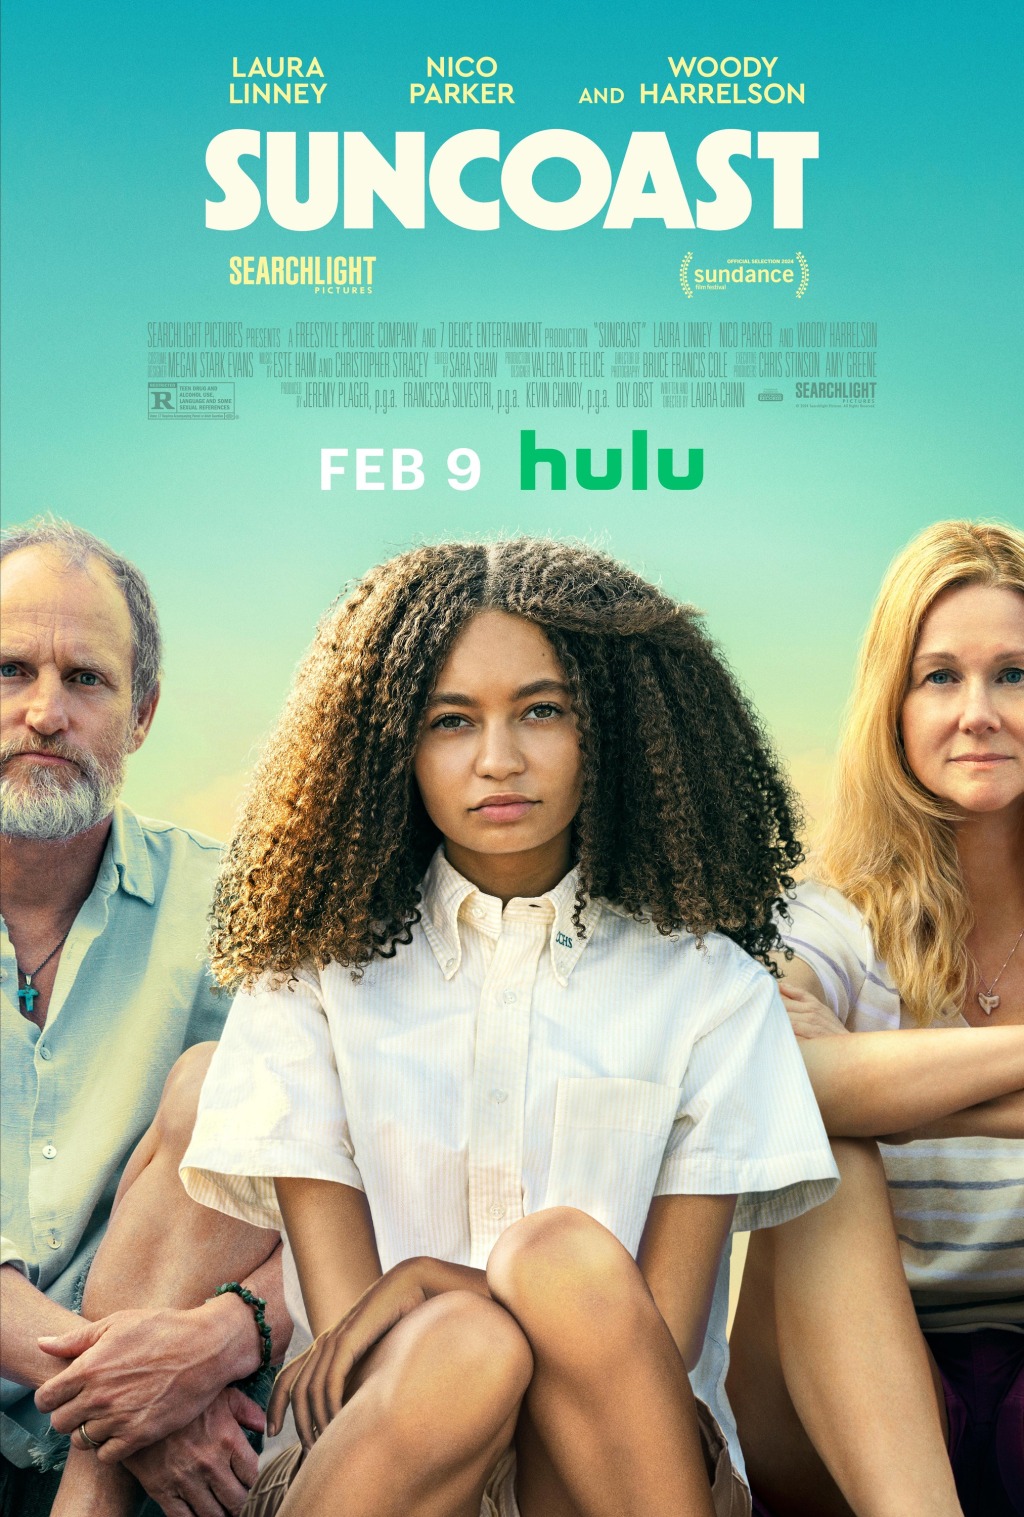 Suncoast Review — An empowering and emotional coming-of-age story